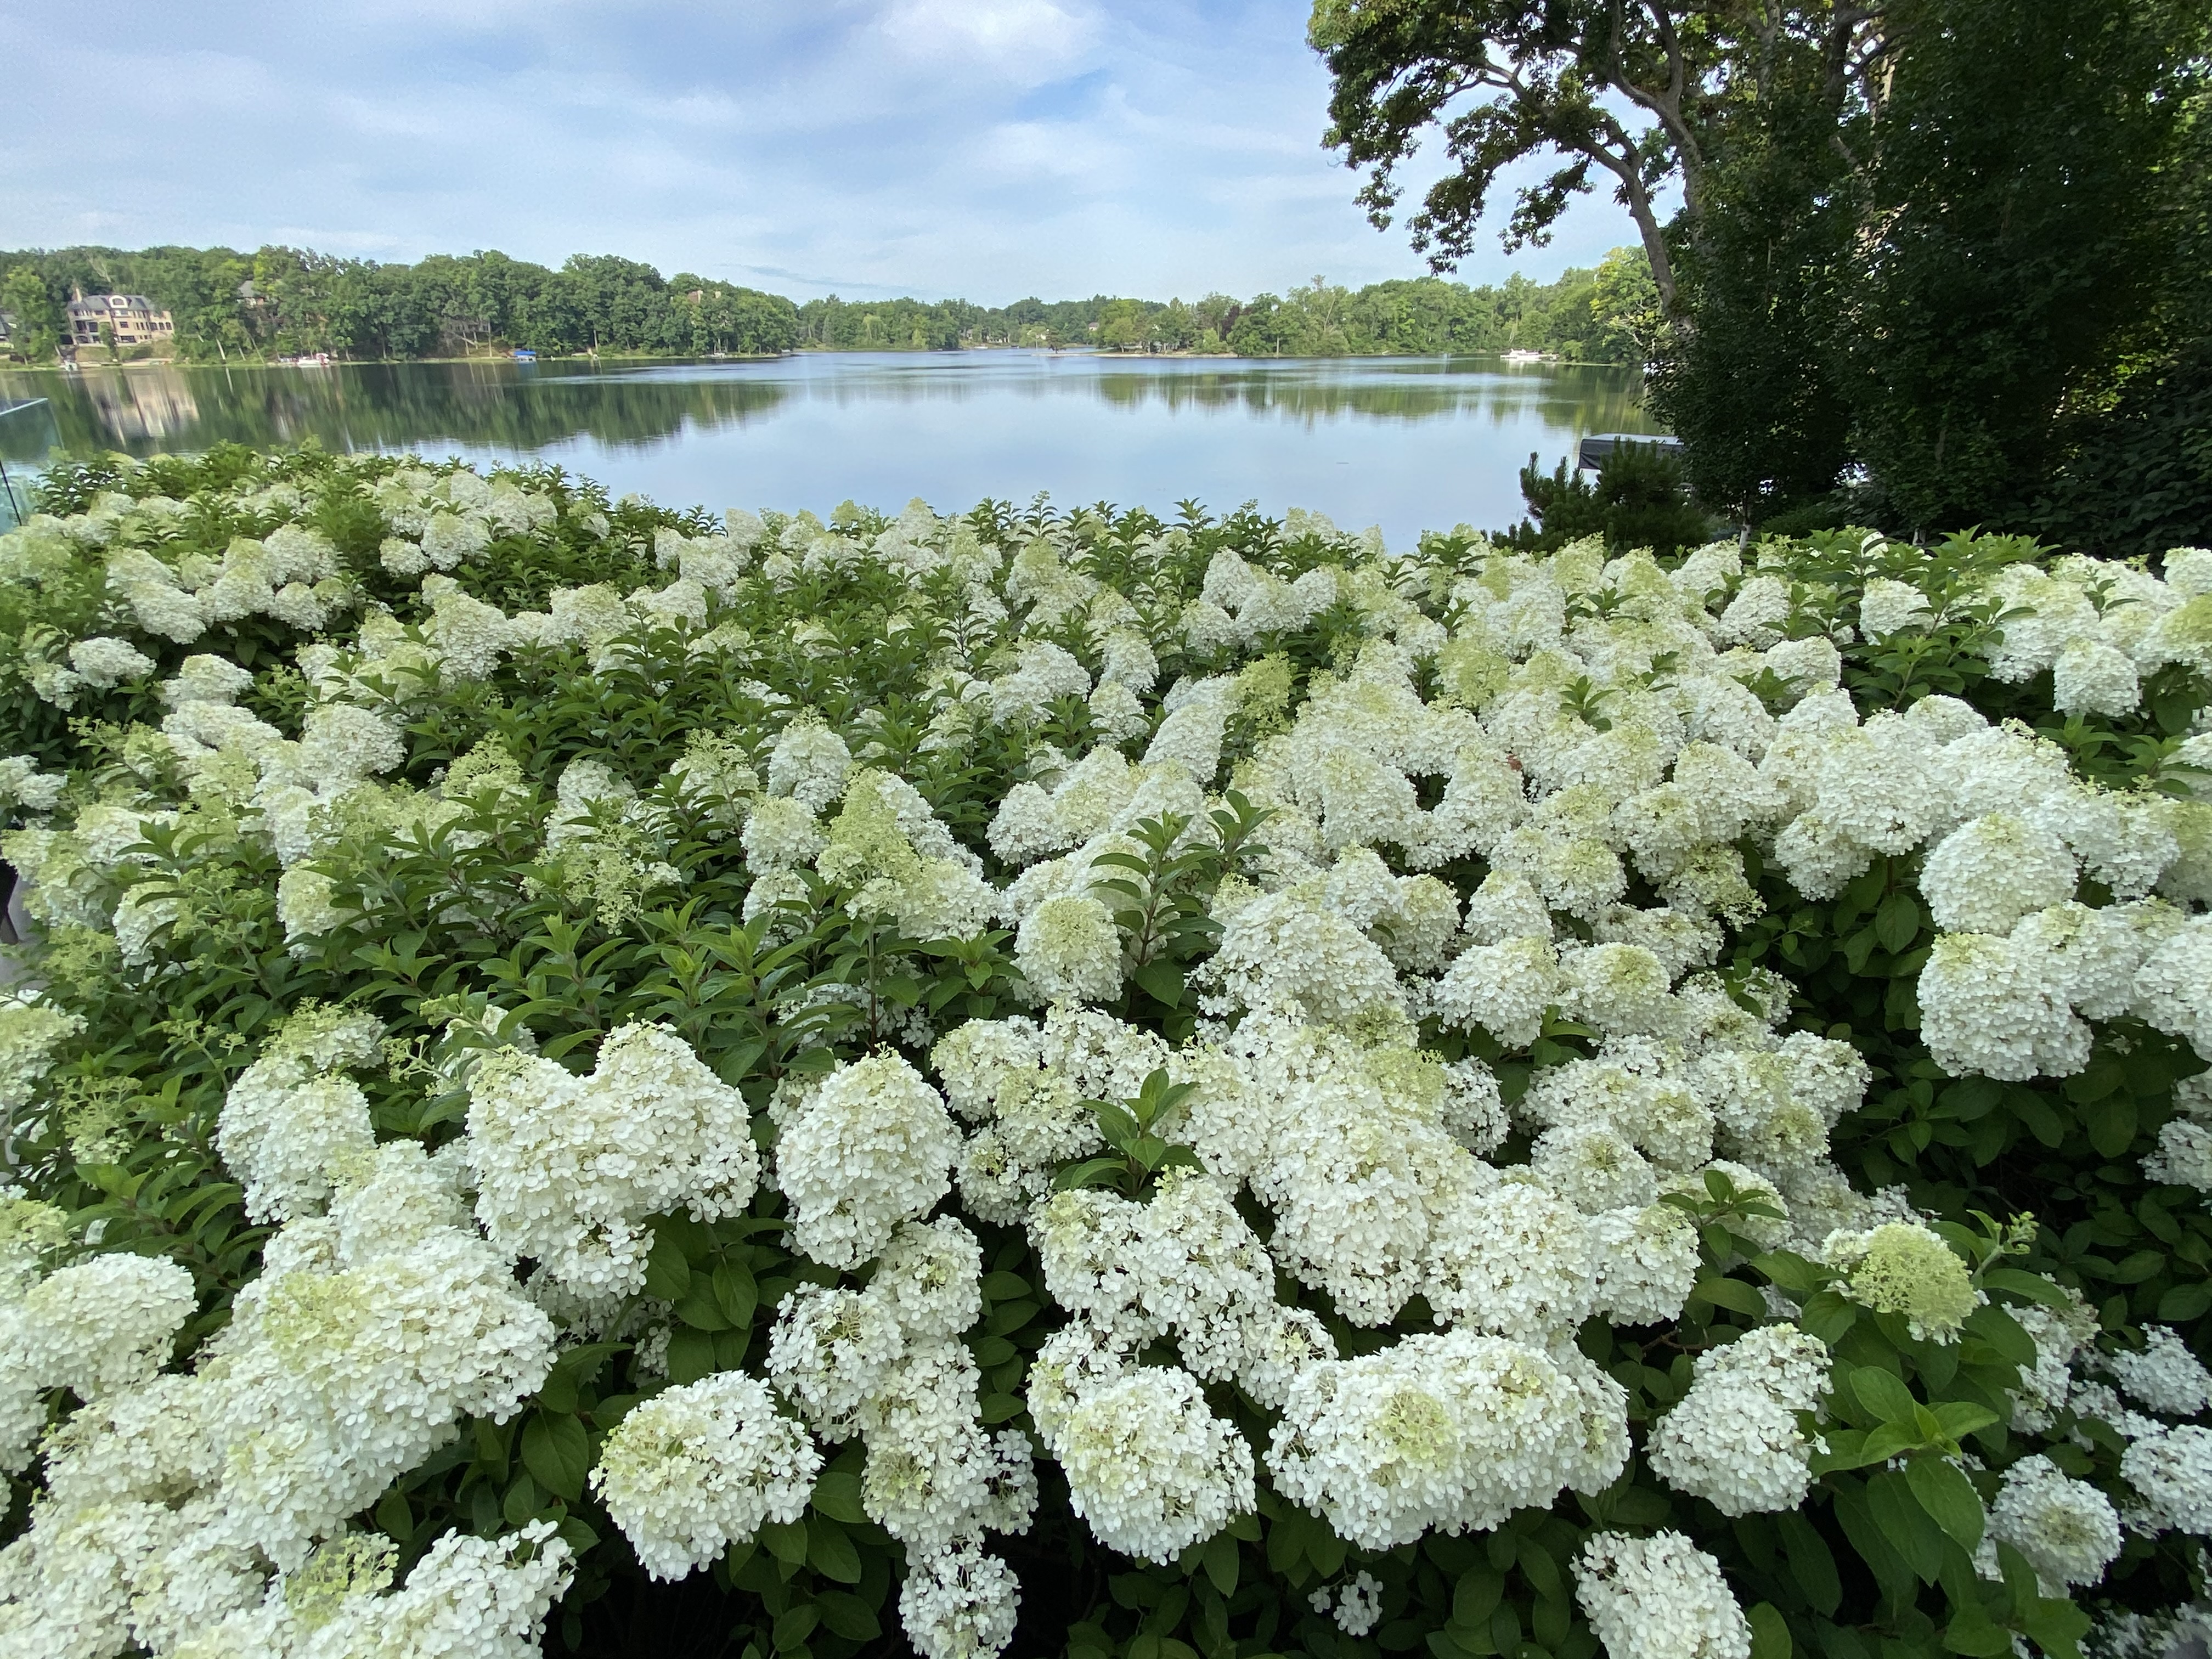 Image of Row of fire and ice hydrangea bushes in bloom